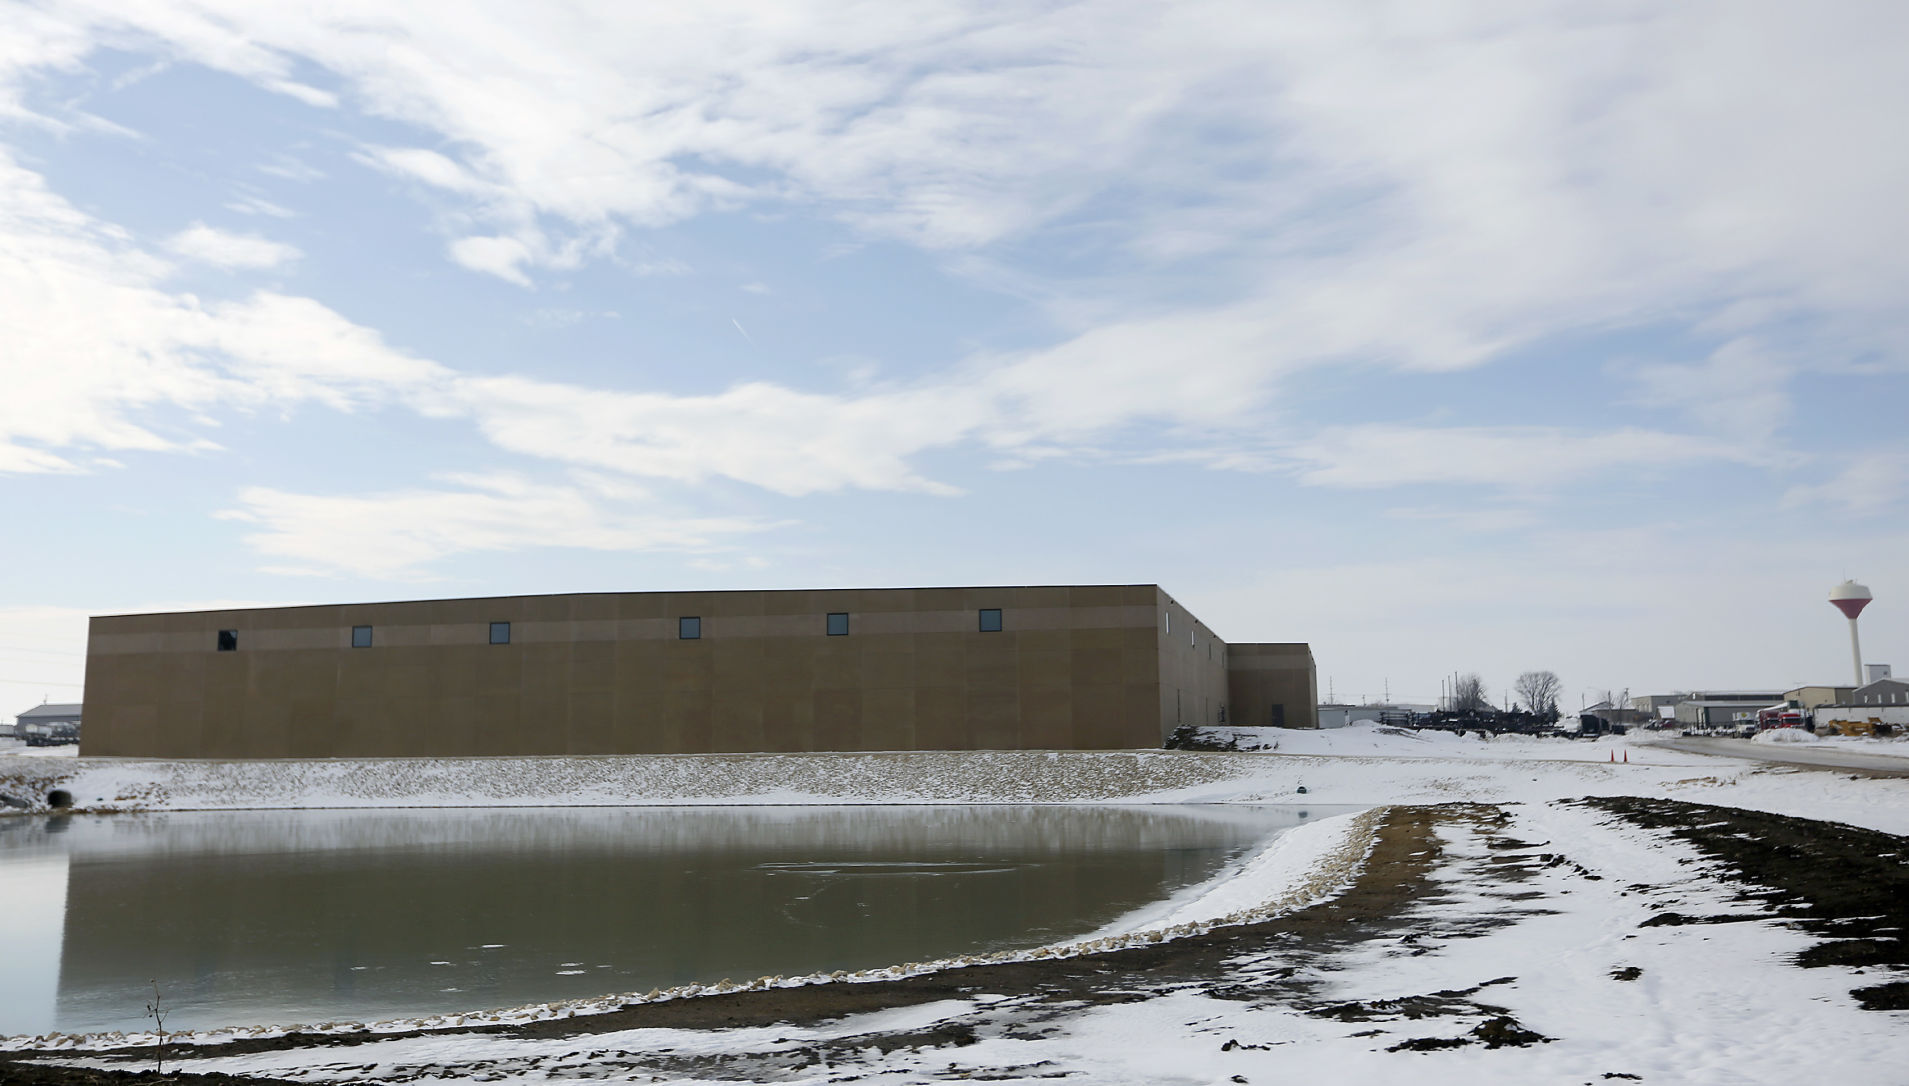 Behnke Enterprises in Farley, Iowa, plans to add 96,000 square feet to its existing facility and build another. PHOTO CREDIT: NICKI KOHL